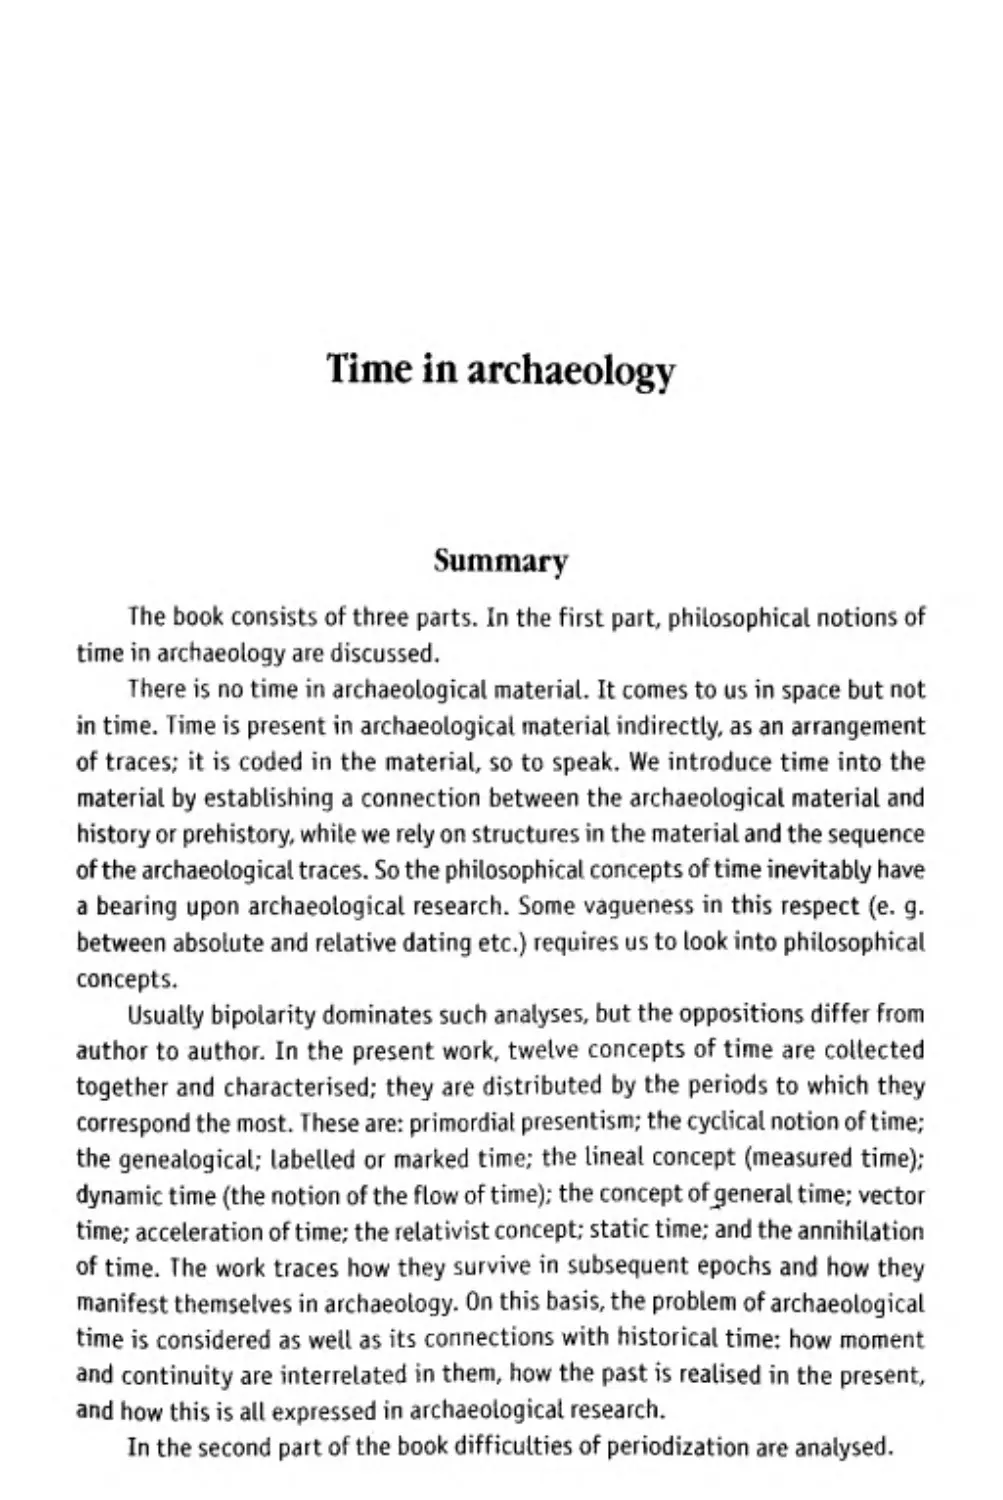 Time in archeology. Summary